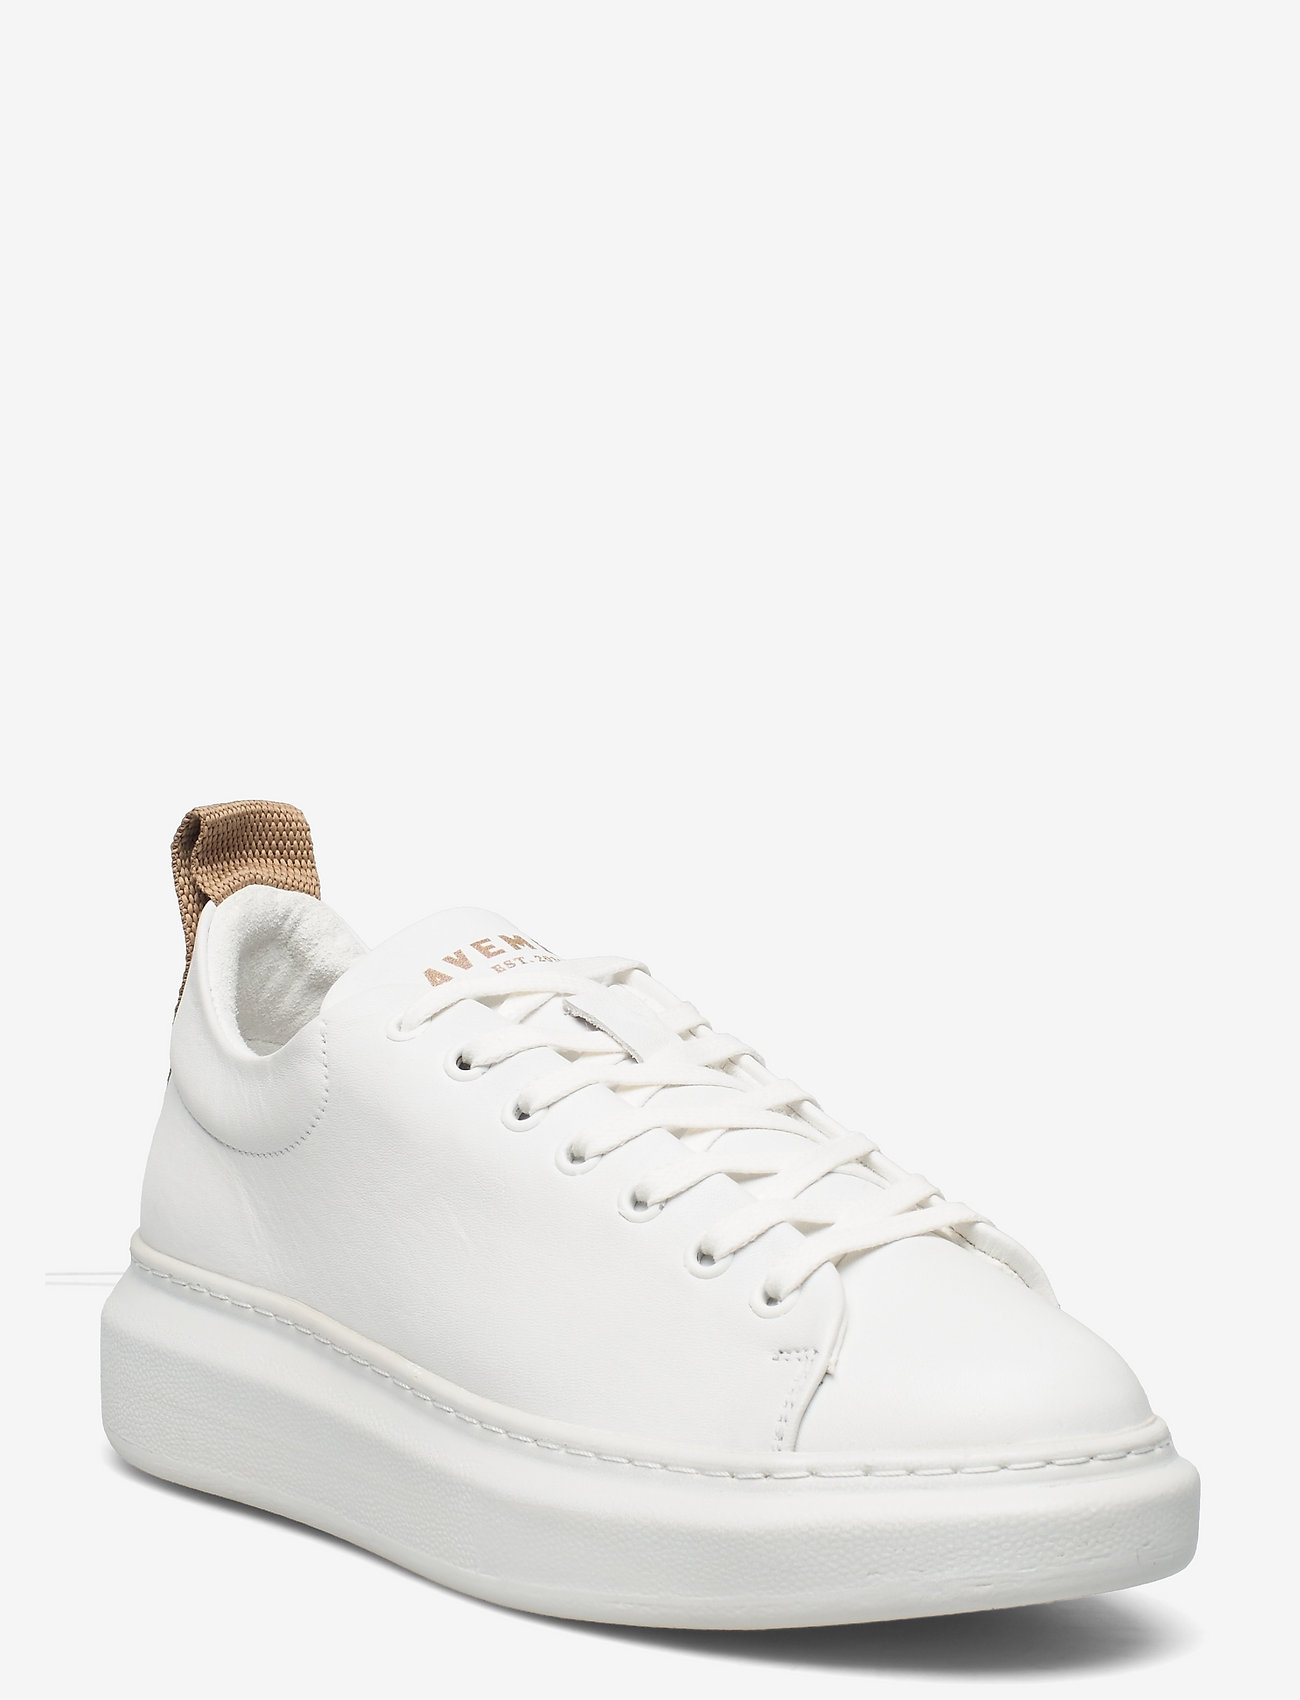 Pavement - Dee color - low top sneakers - white/beige - 0